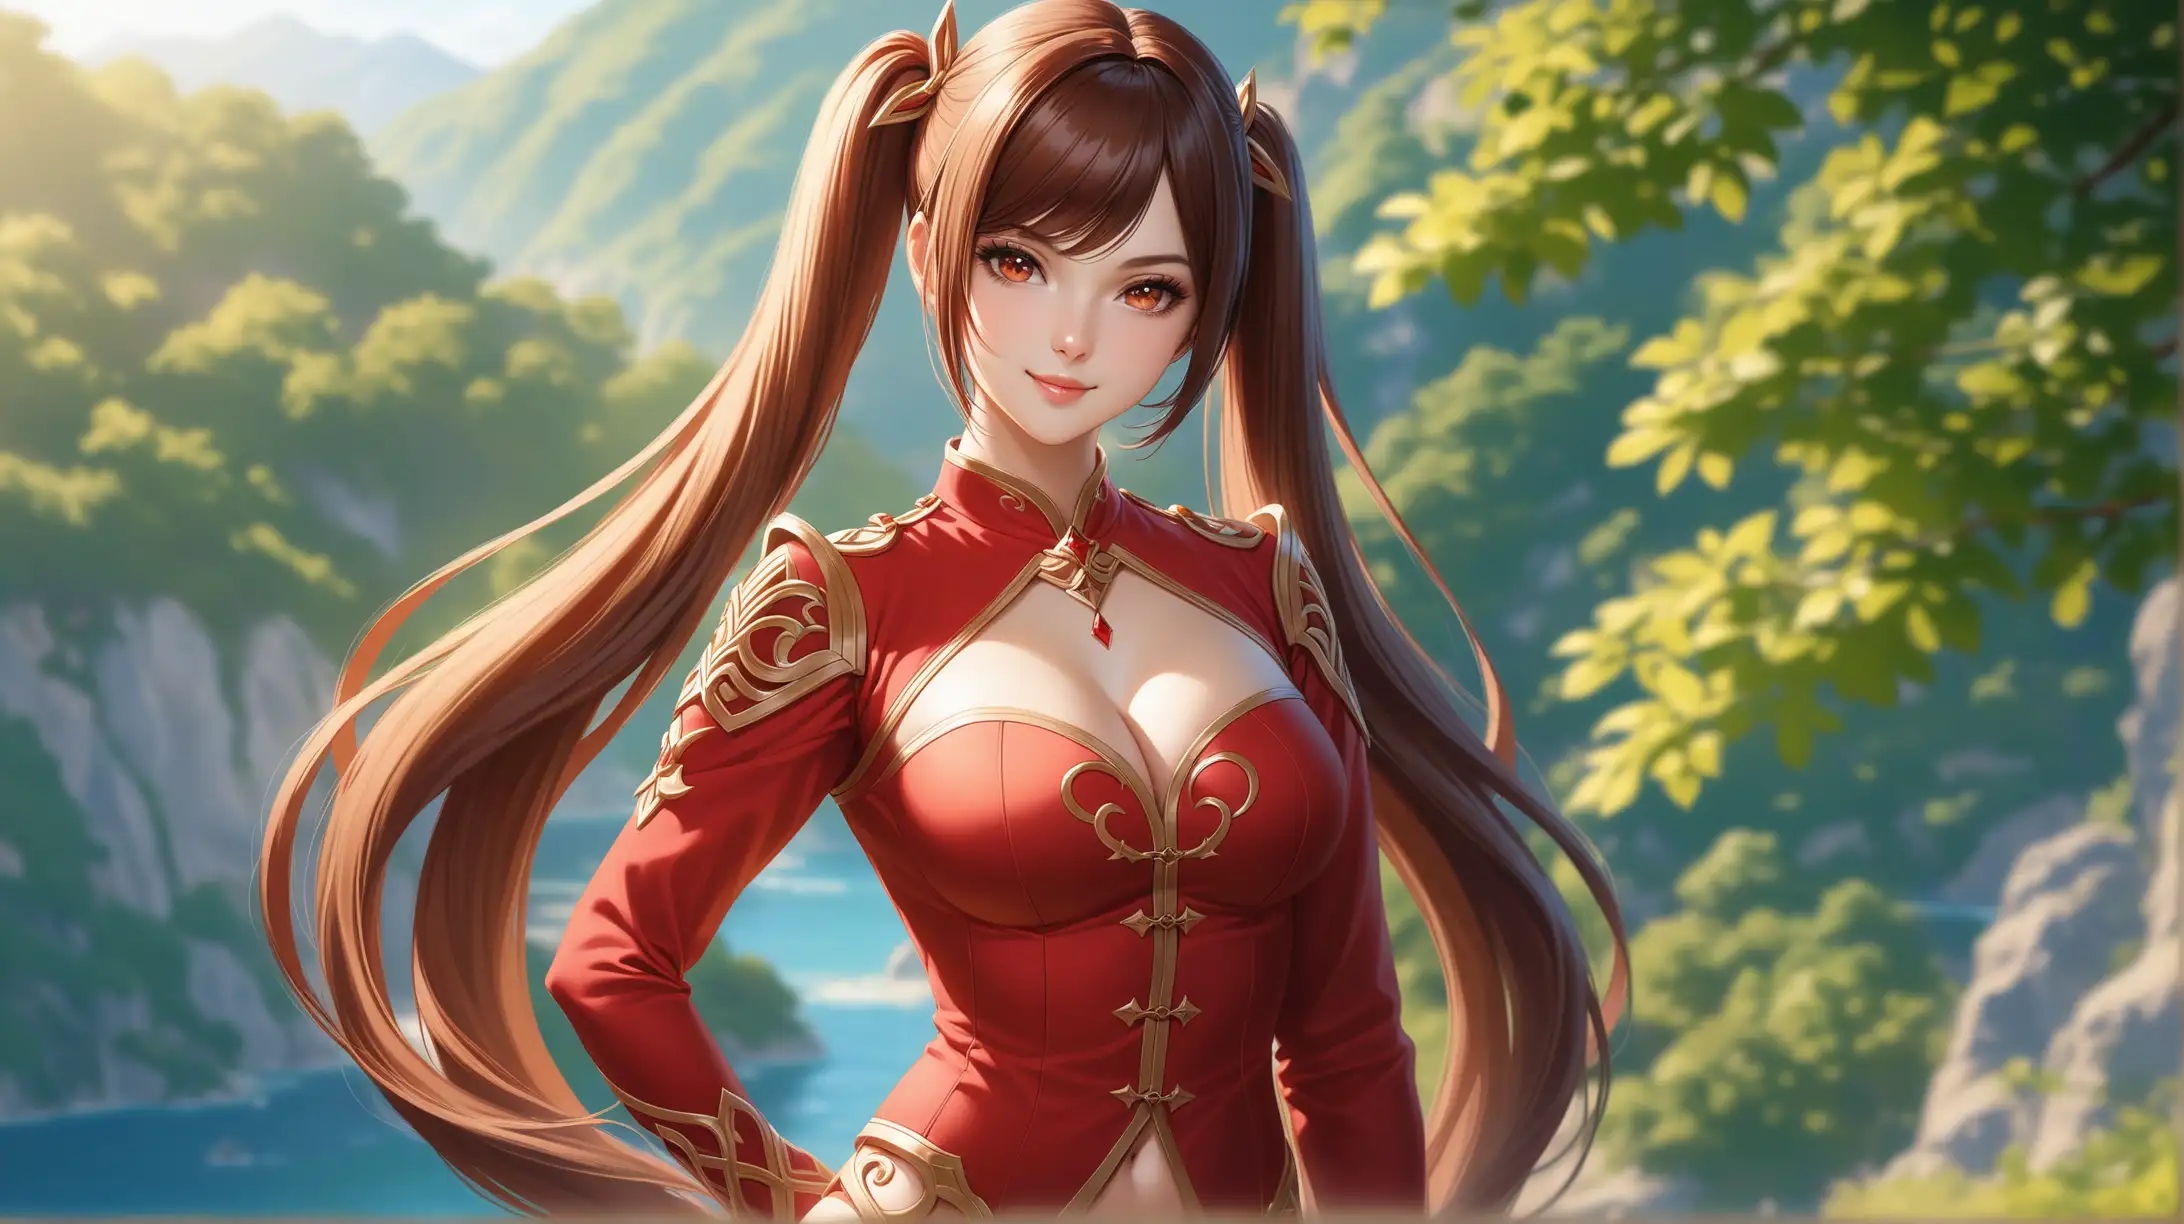 Draw a woman, very long reddish-brown hair, twintails that go past hips, side locks, side-swept bangs, scarlet eyes, perky figure, high quality, realistic, accurate, detailed, long shot, natural lighting, outdoors, seductive pose, outfit inspired from Genshin Impact, smiling at the viewer